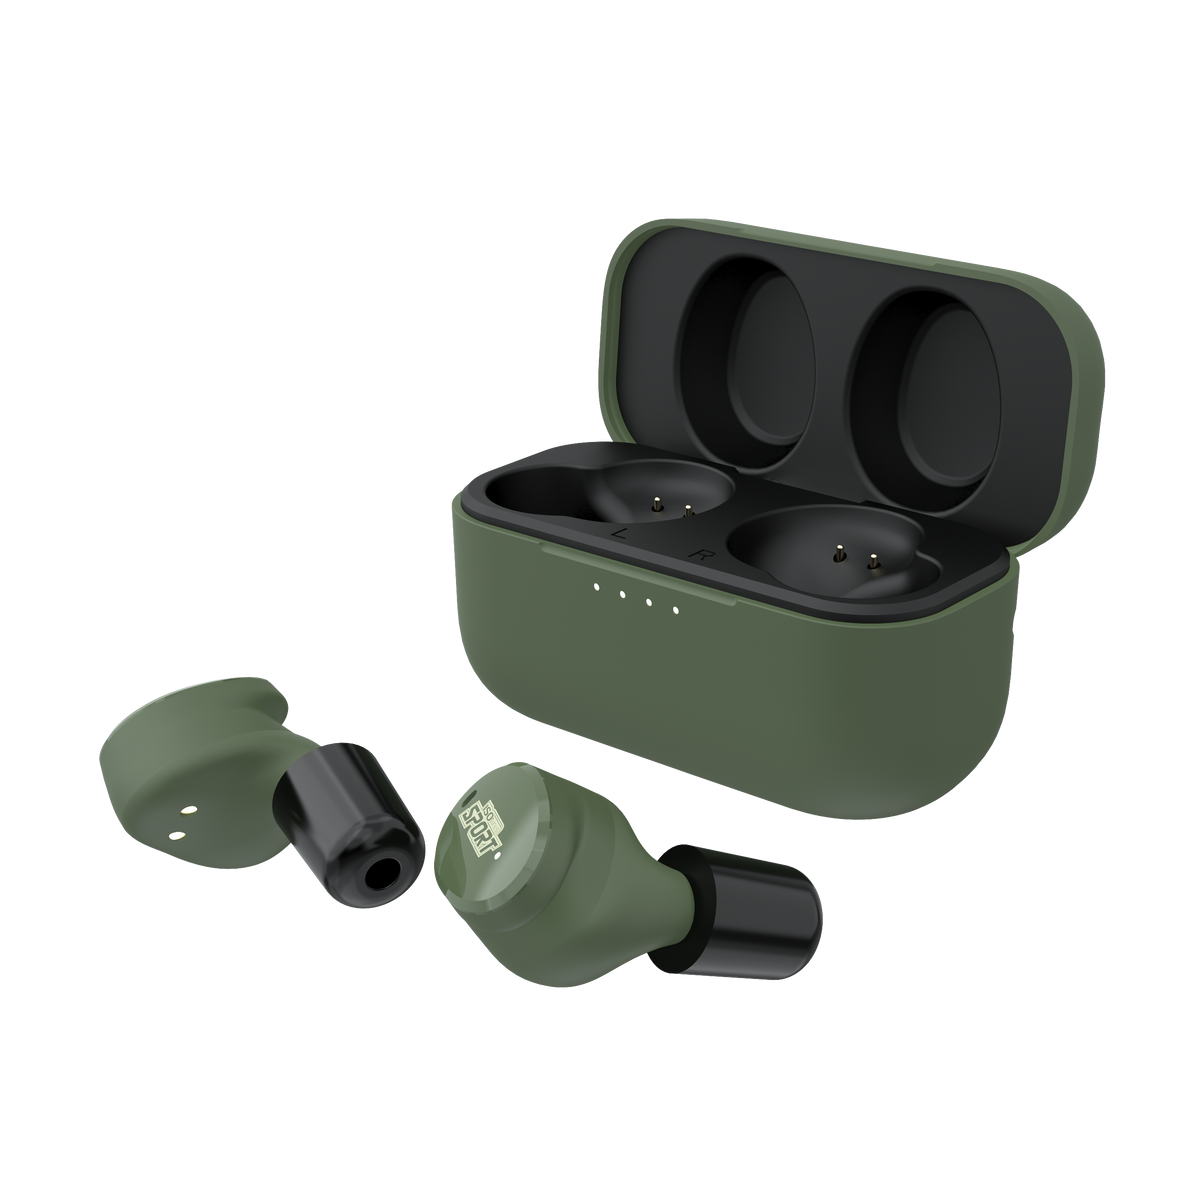 ISOtunes Sport INSTINCT Electronic Earplugs with Charging Case